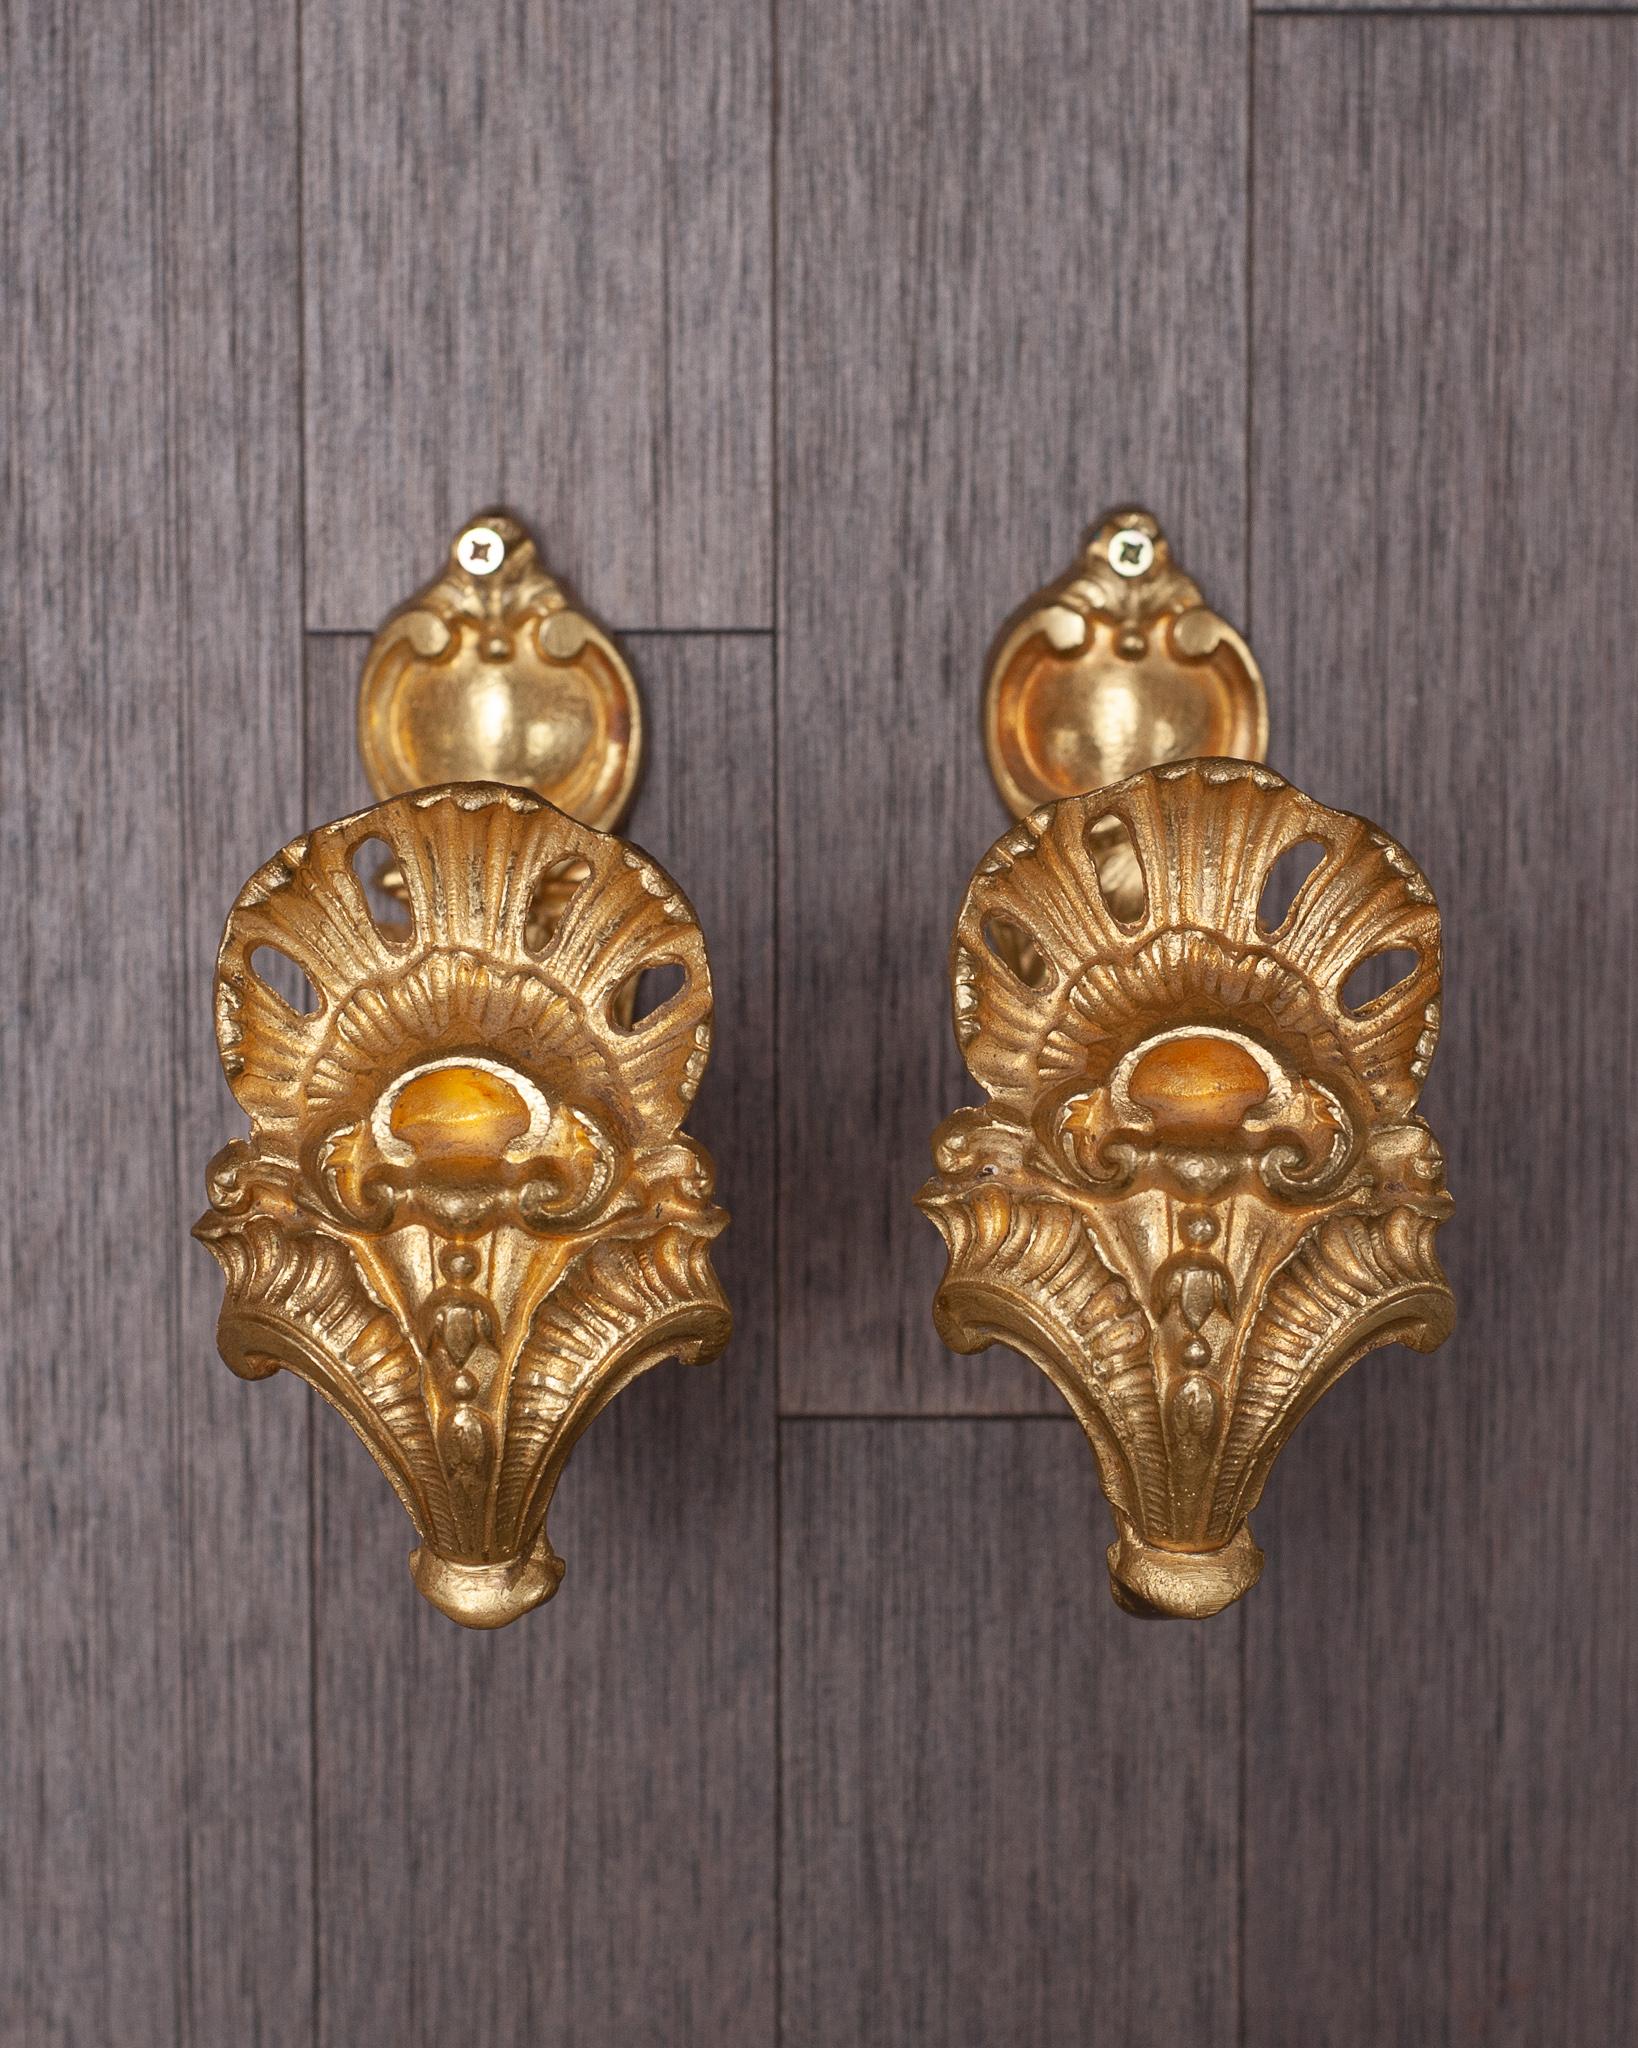 An antique French pair of sculpted gilt bronze curtain hooks or tie-backs richly decorated with shell motifs.